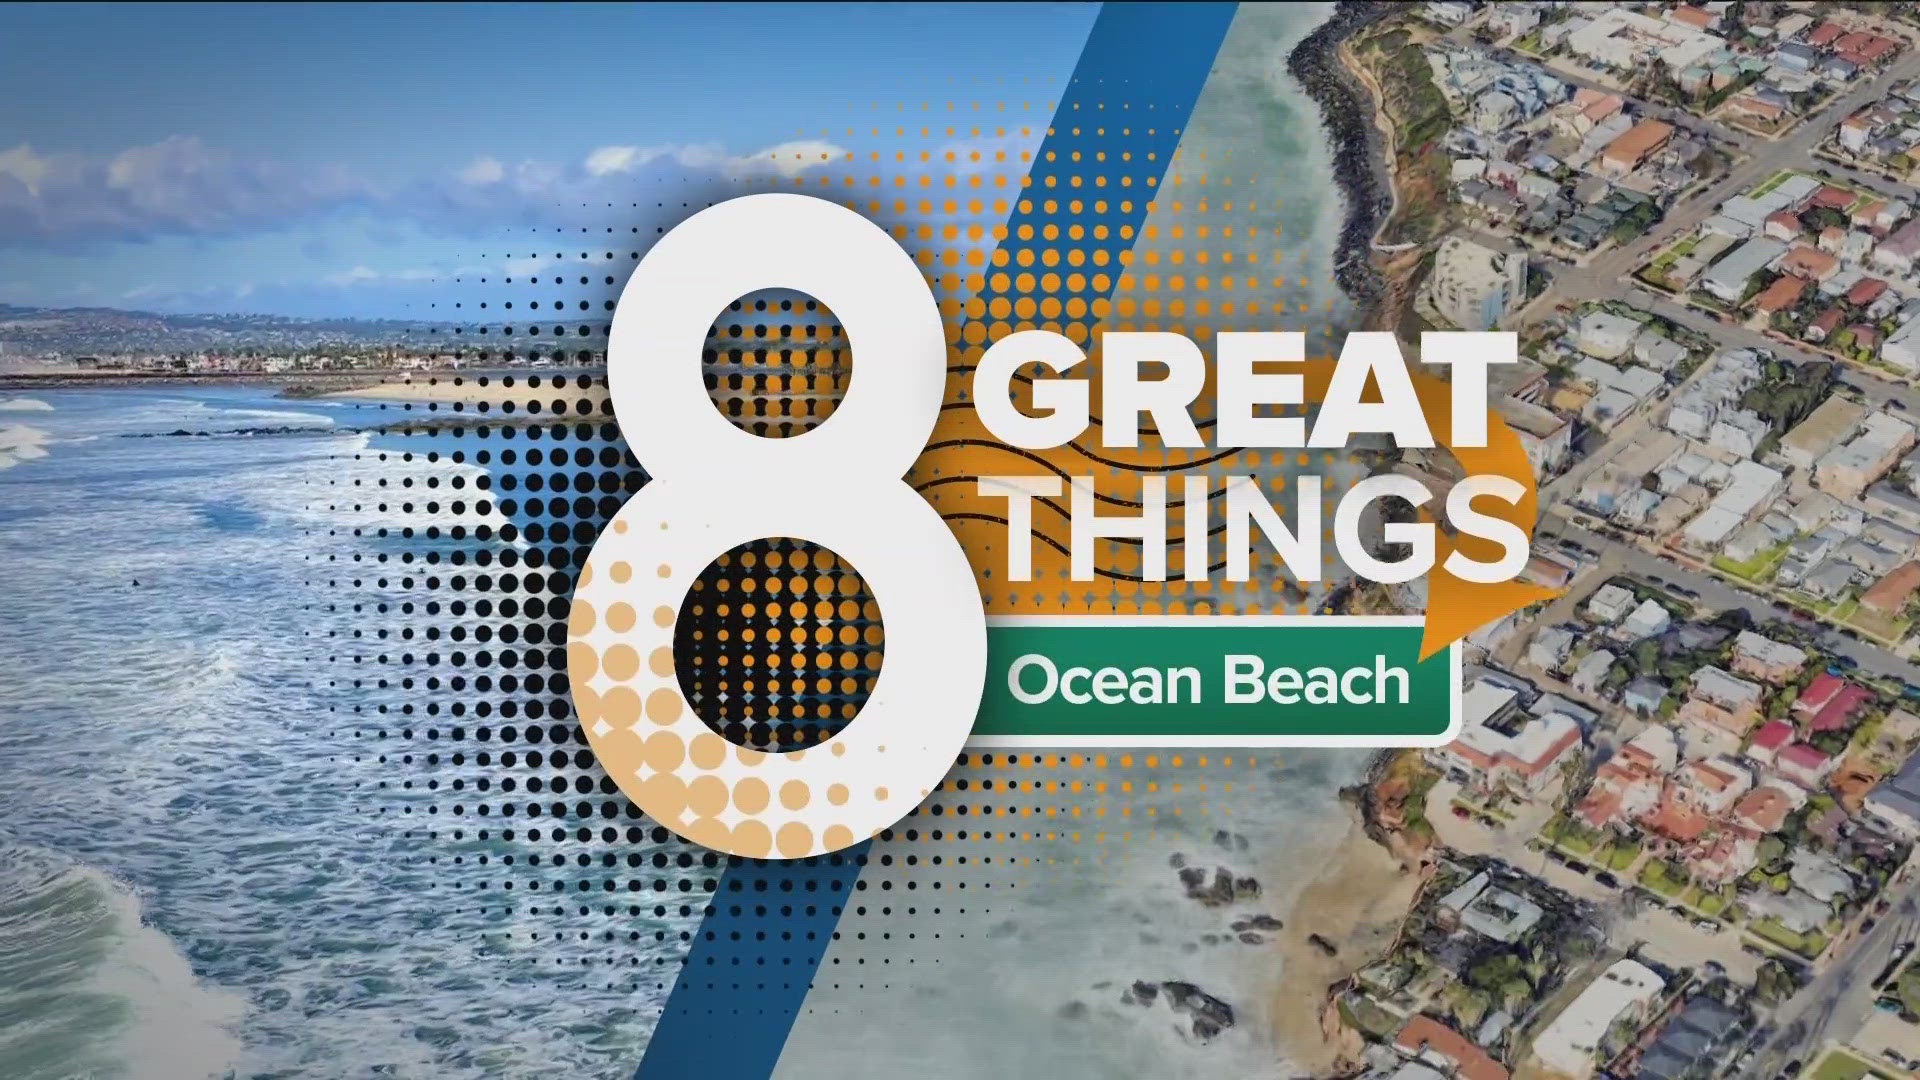 There are many diverse things to do, places to visit and restaurants to eat at in Ocean Beach including several opportunities that involve the great outdoors.